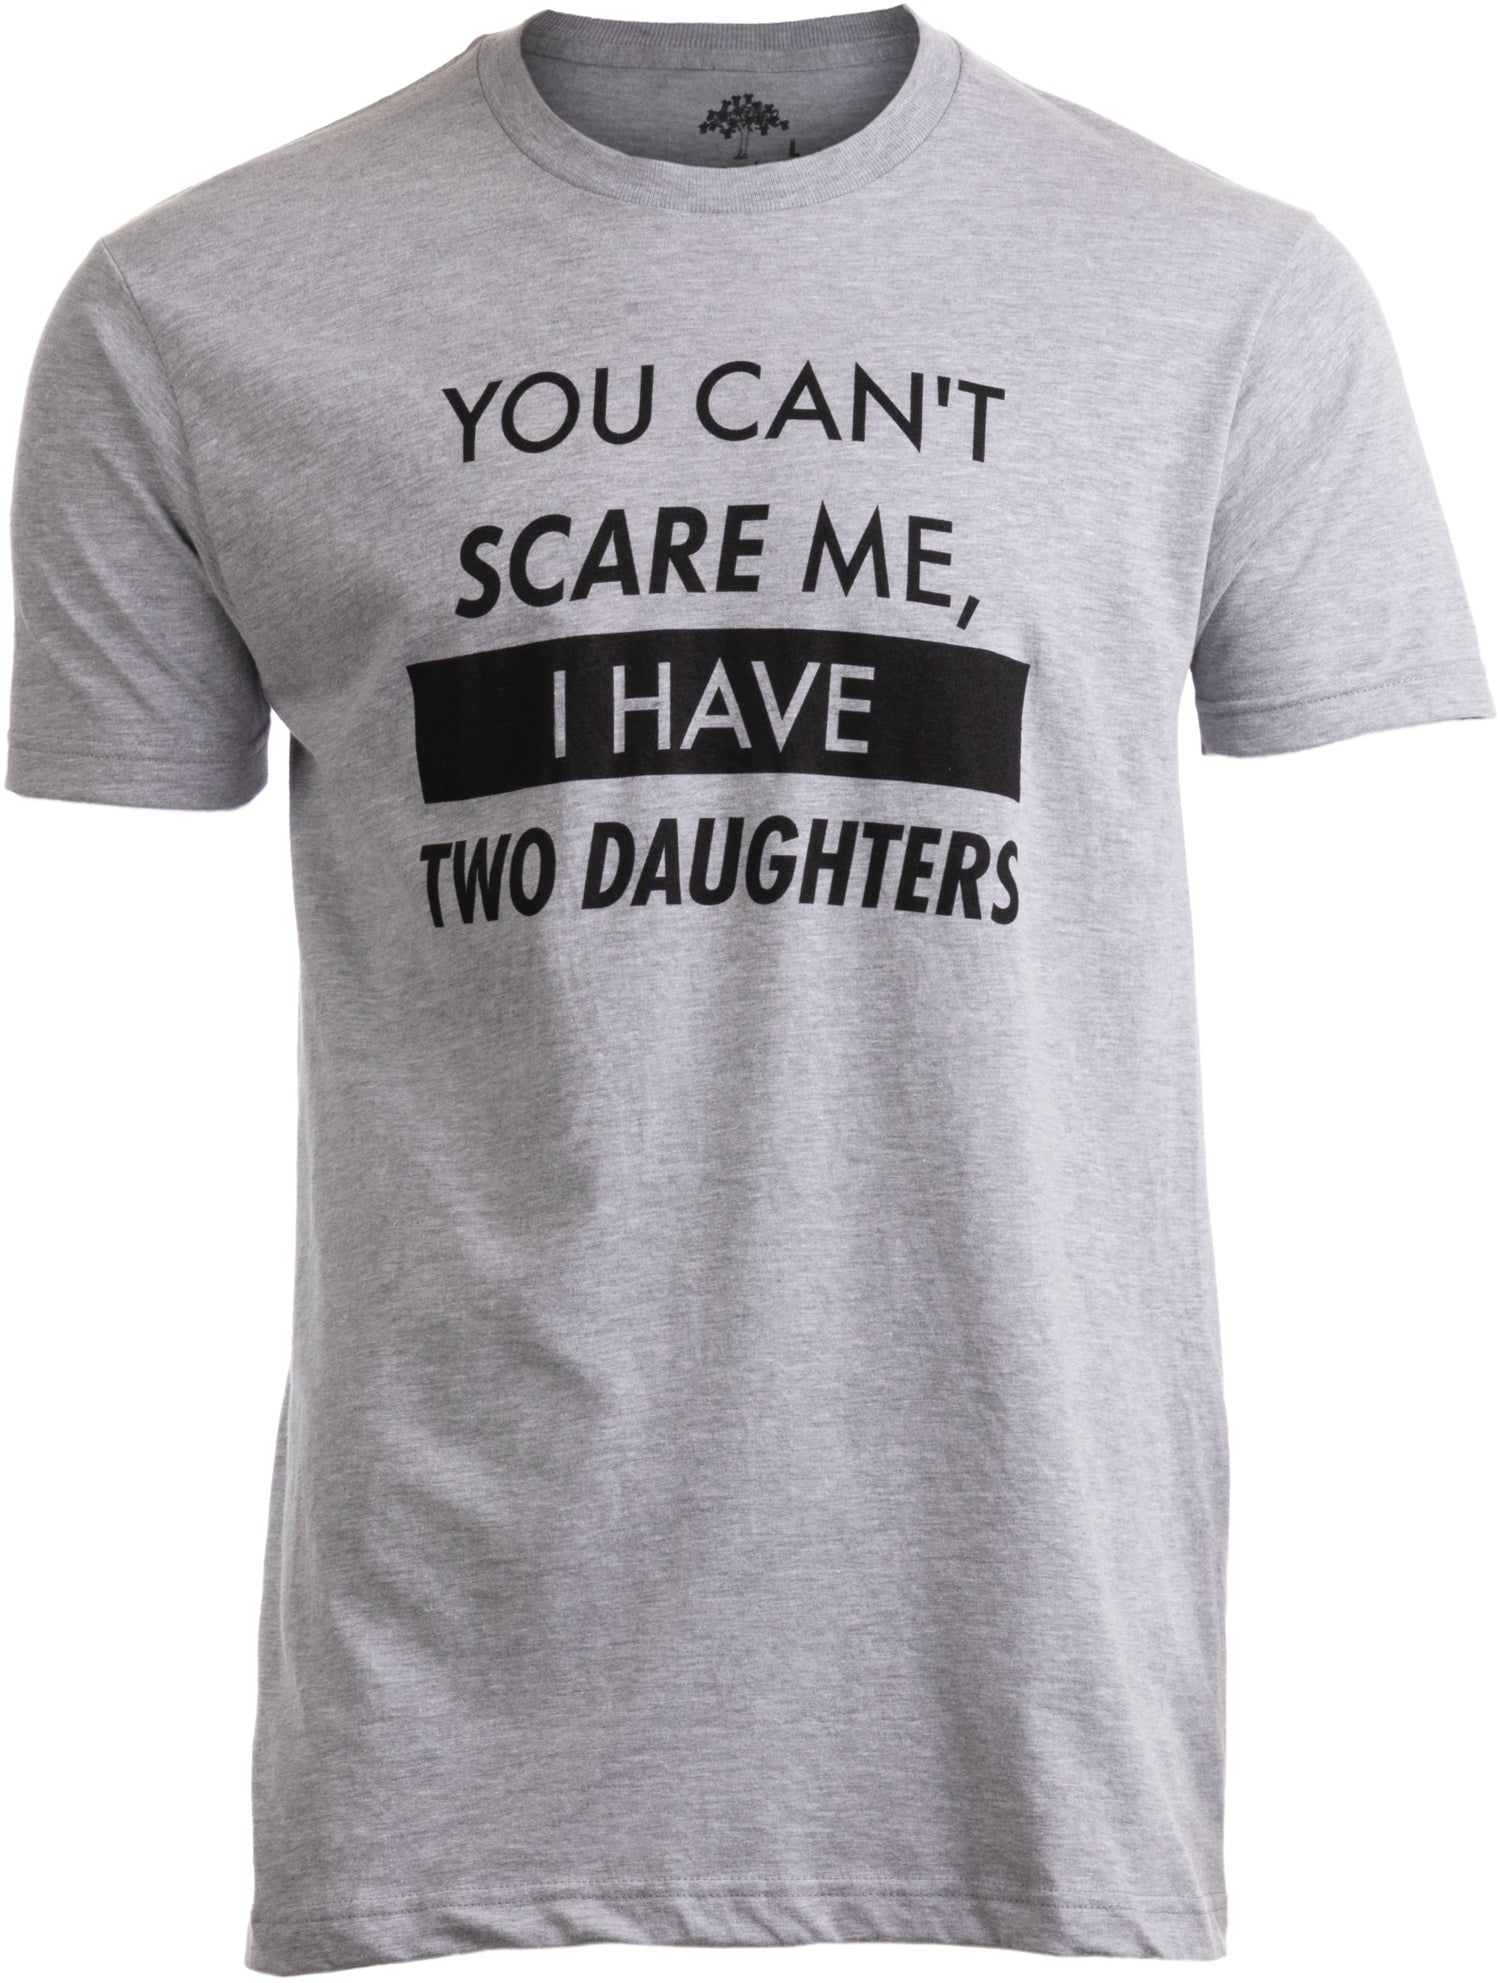 Can't Me, I have Two Daughters" - Funny Dad Joke, Father T- Ann Arbor T-shirt Company